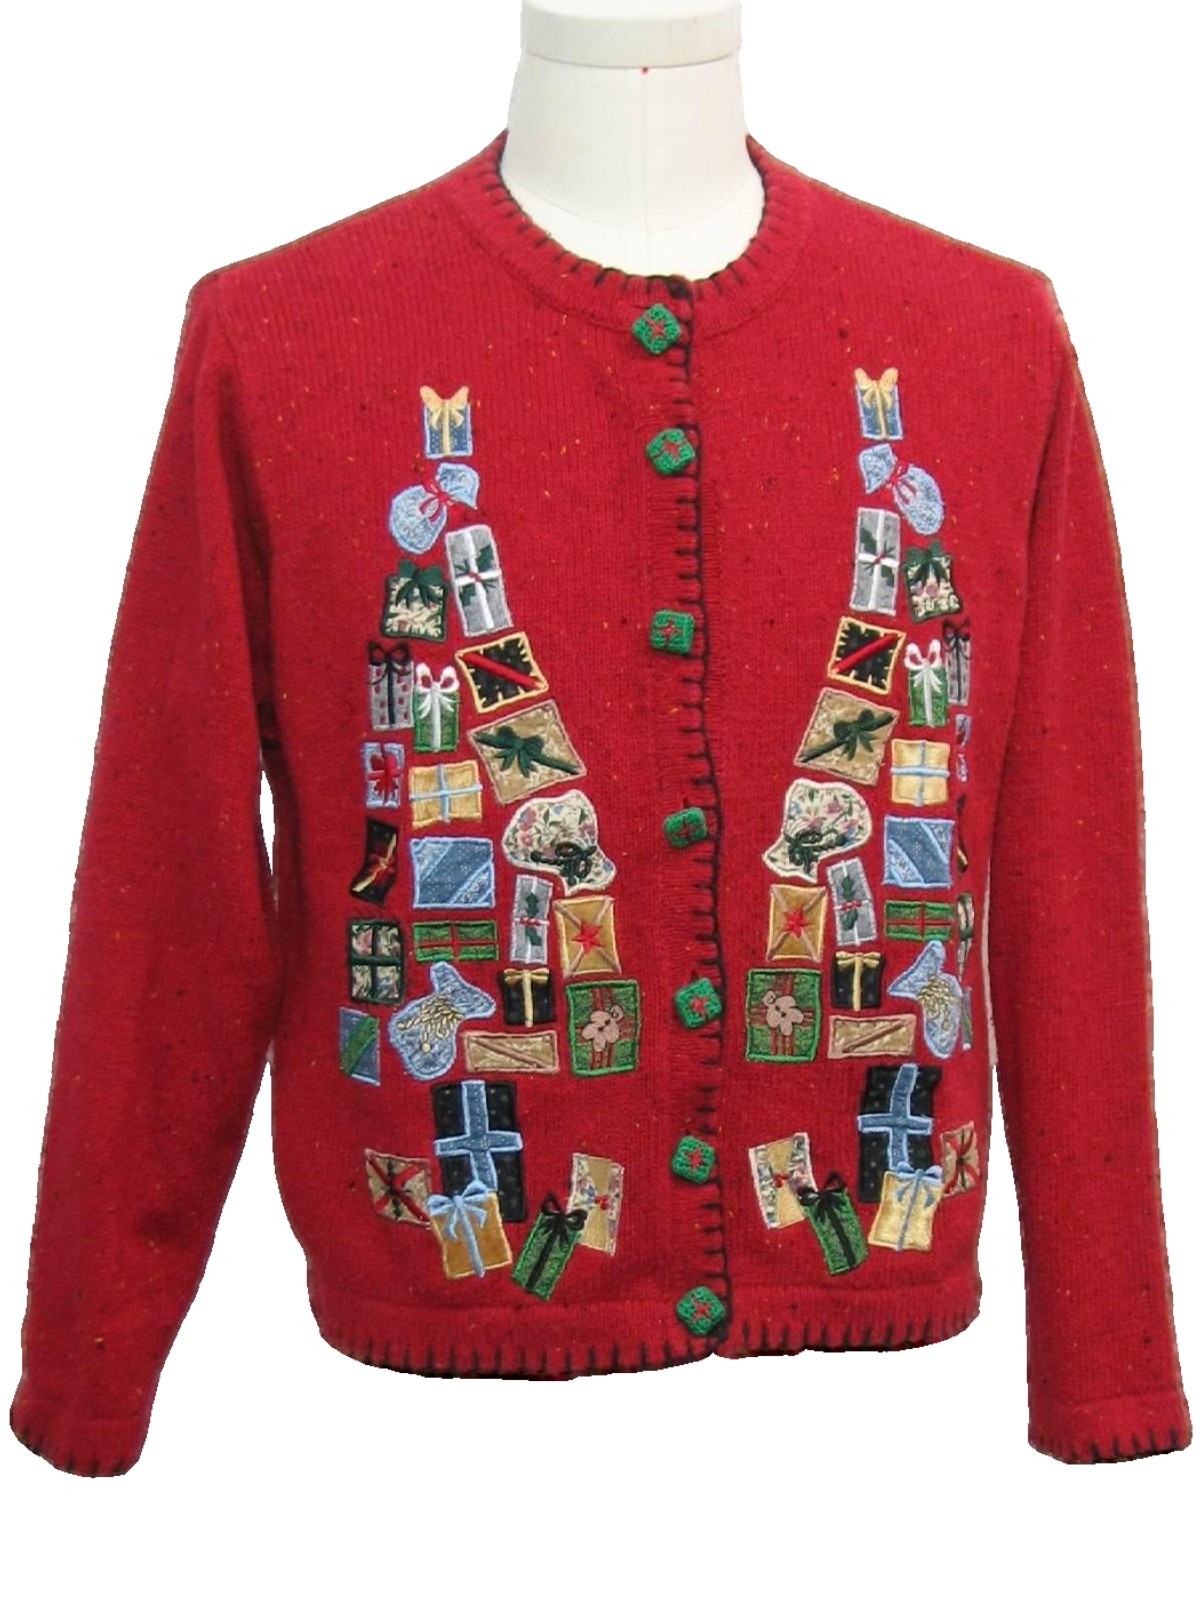 Womens Ugly Christmas Sweater: -Victoria Jones- Womens red background ...